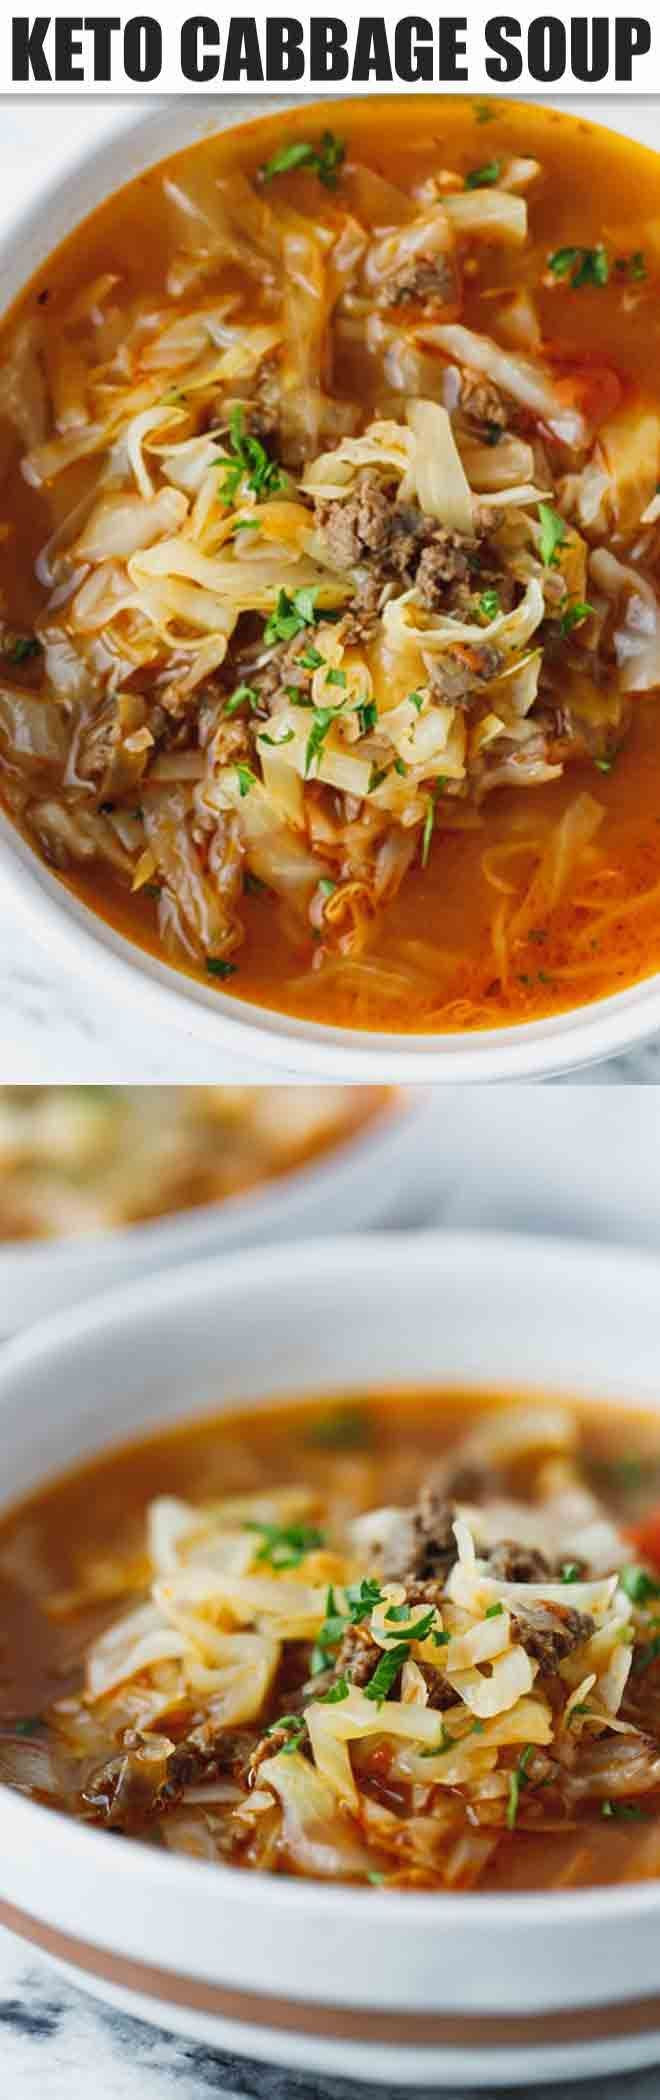 Ground Beef Keto Soup
 Keto Cabbage Soup Recipe – very quick and easy to make